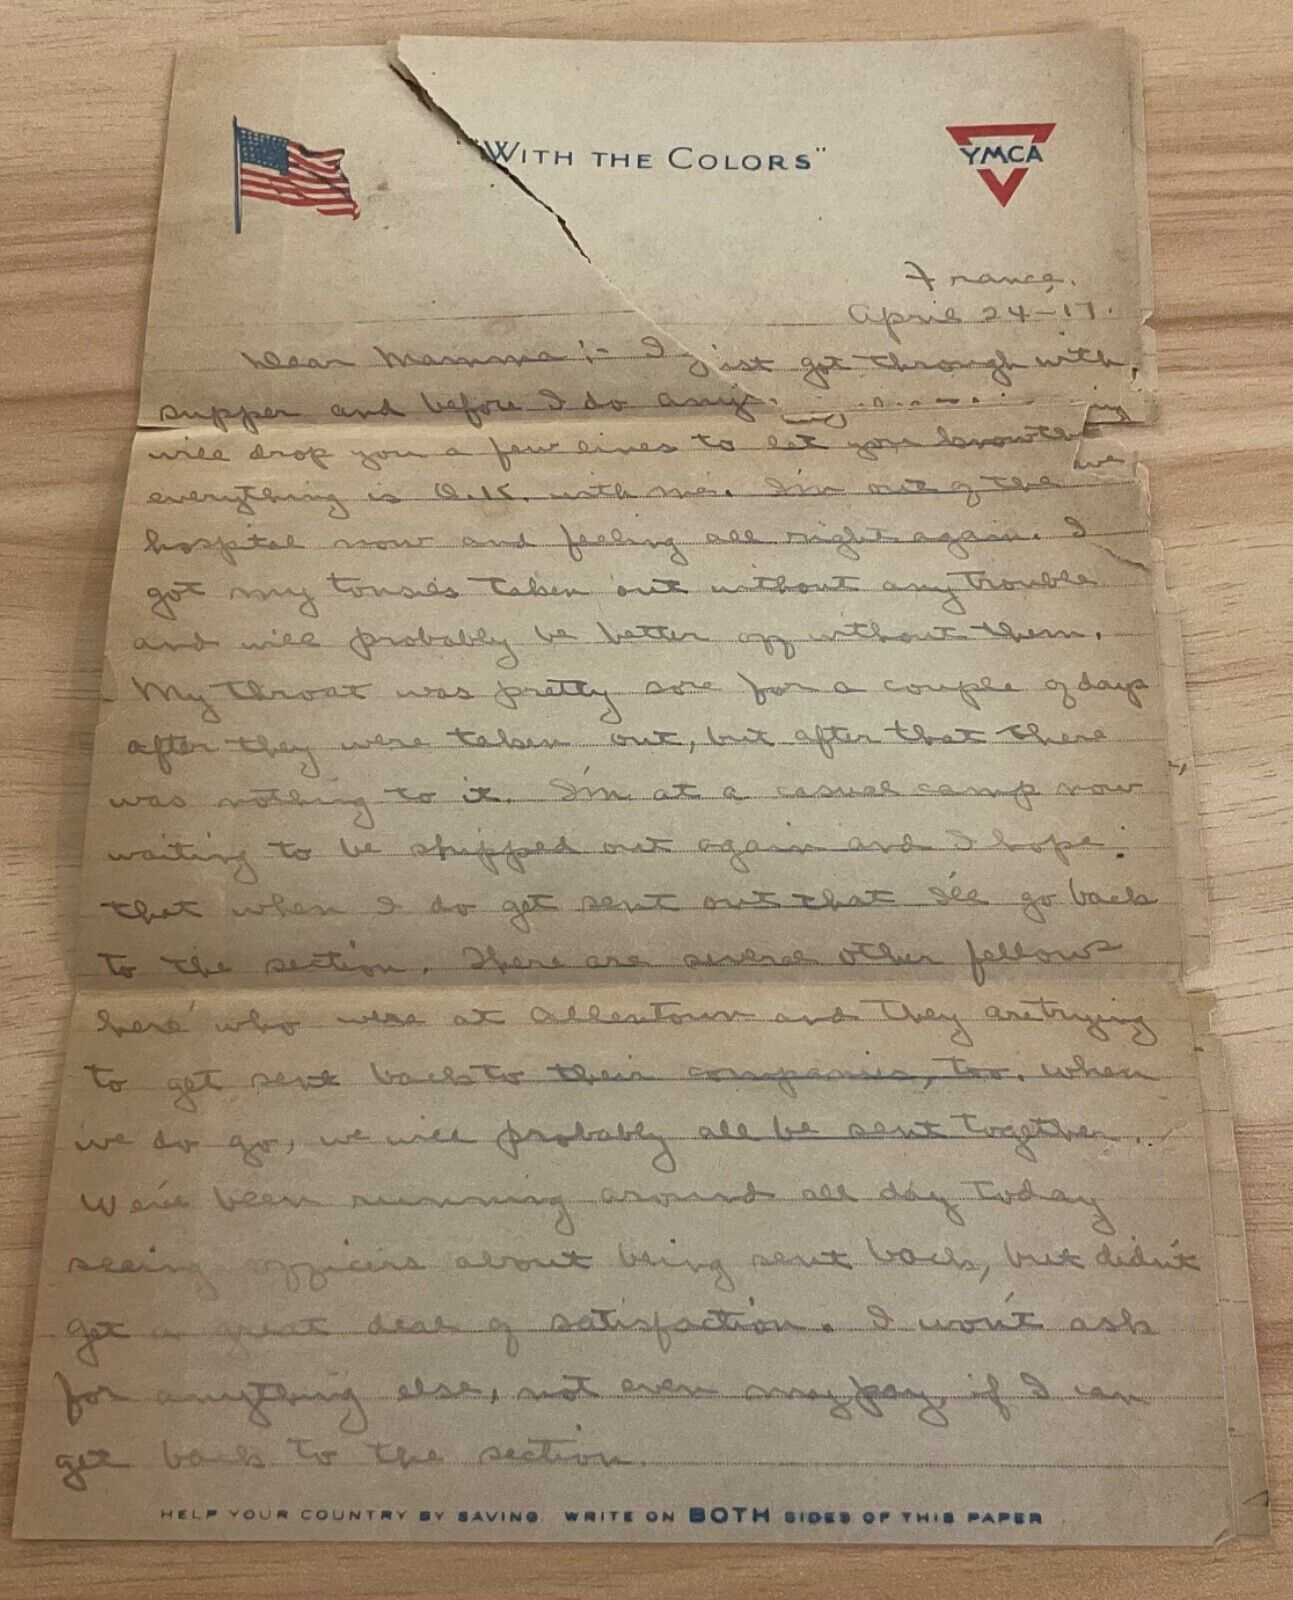 WWI AEF letter US Ambulance Service Sec. 583 out of hospital, raising a mustache